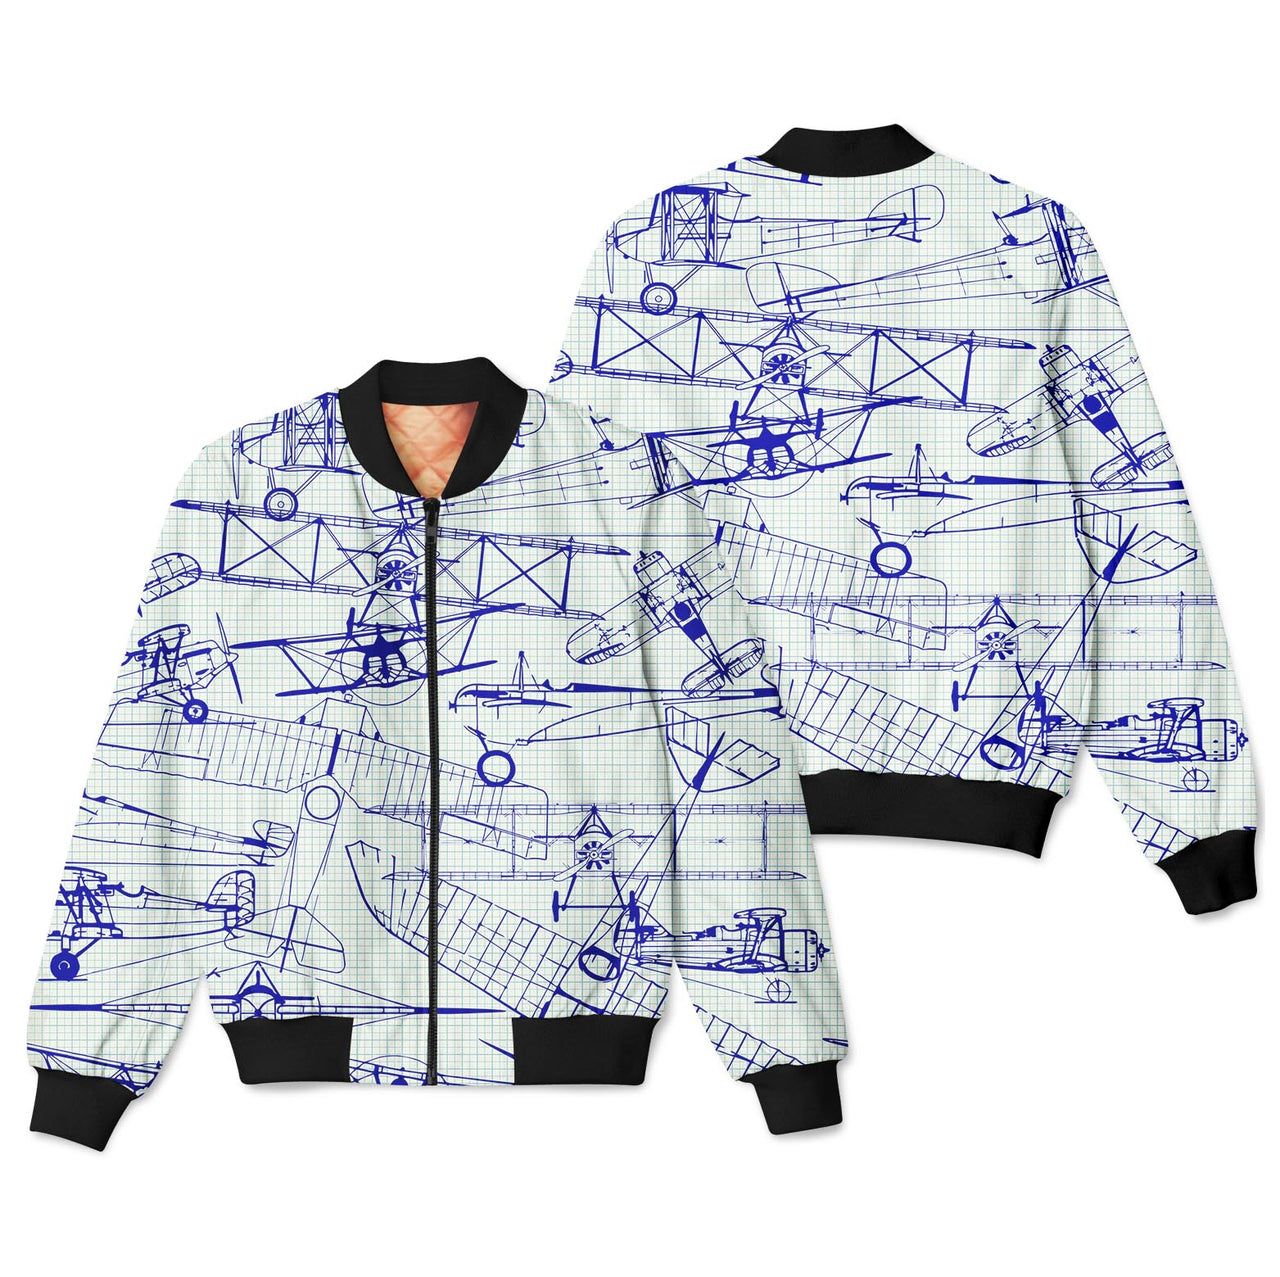 Amazing Drawings of Old Aircrafts Designed 3D Pilot Bomber Jackets